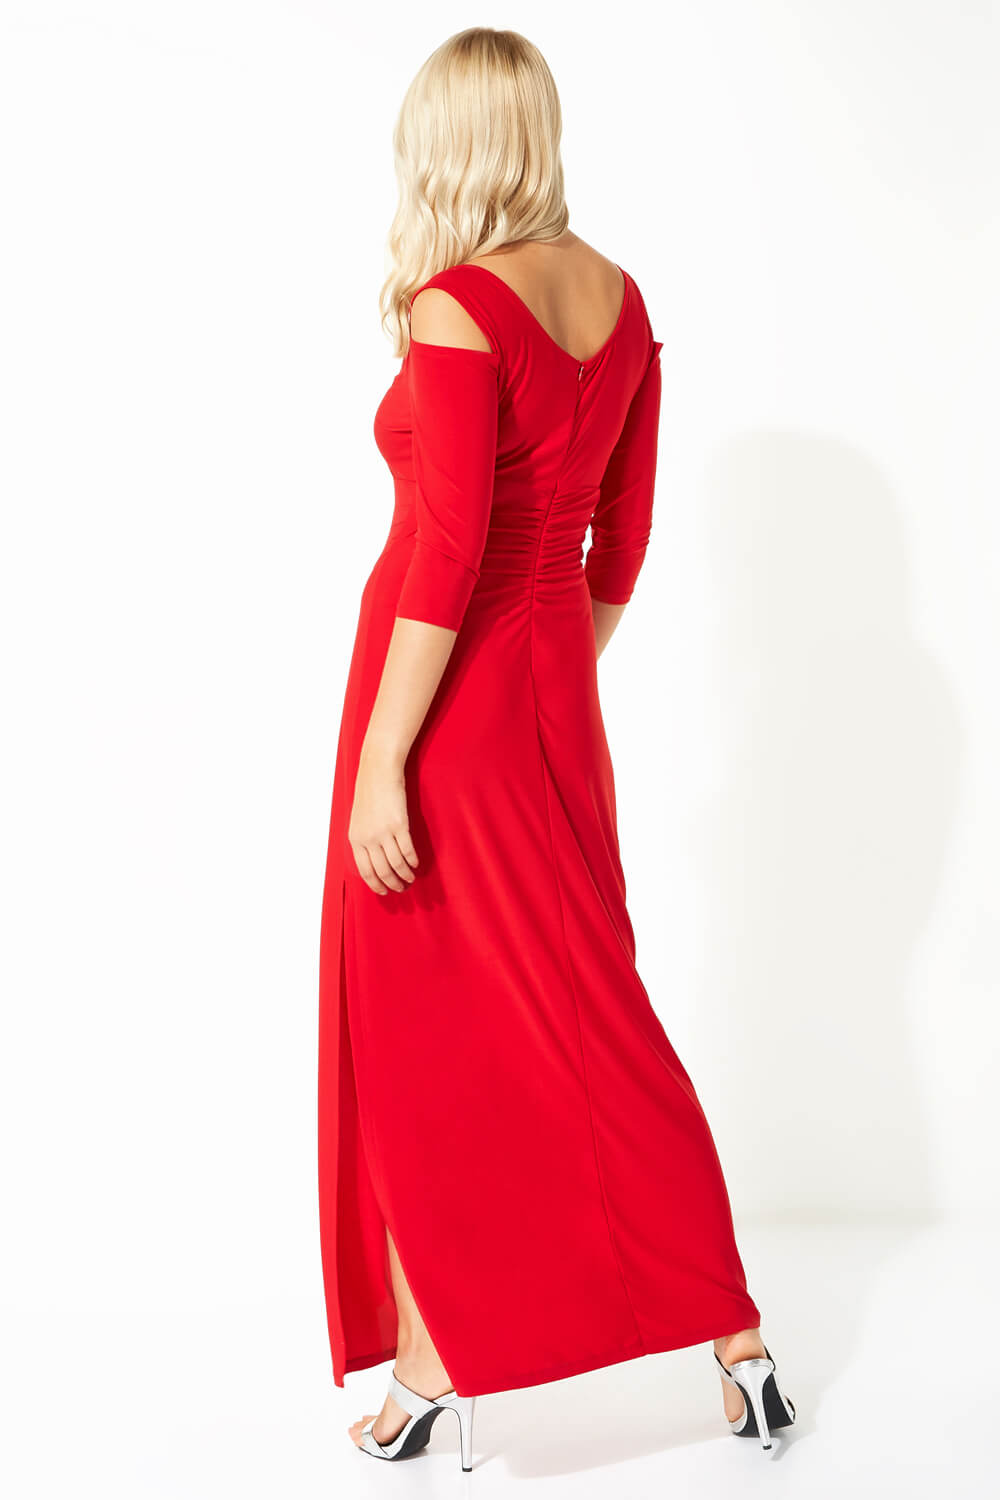 Red Cold Shoulder Diamante Maxi Dress, Image 2 of 4